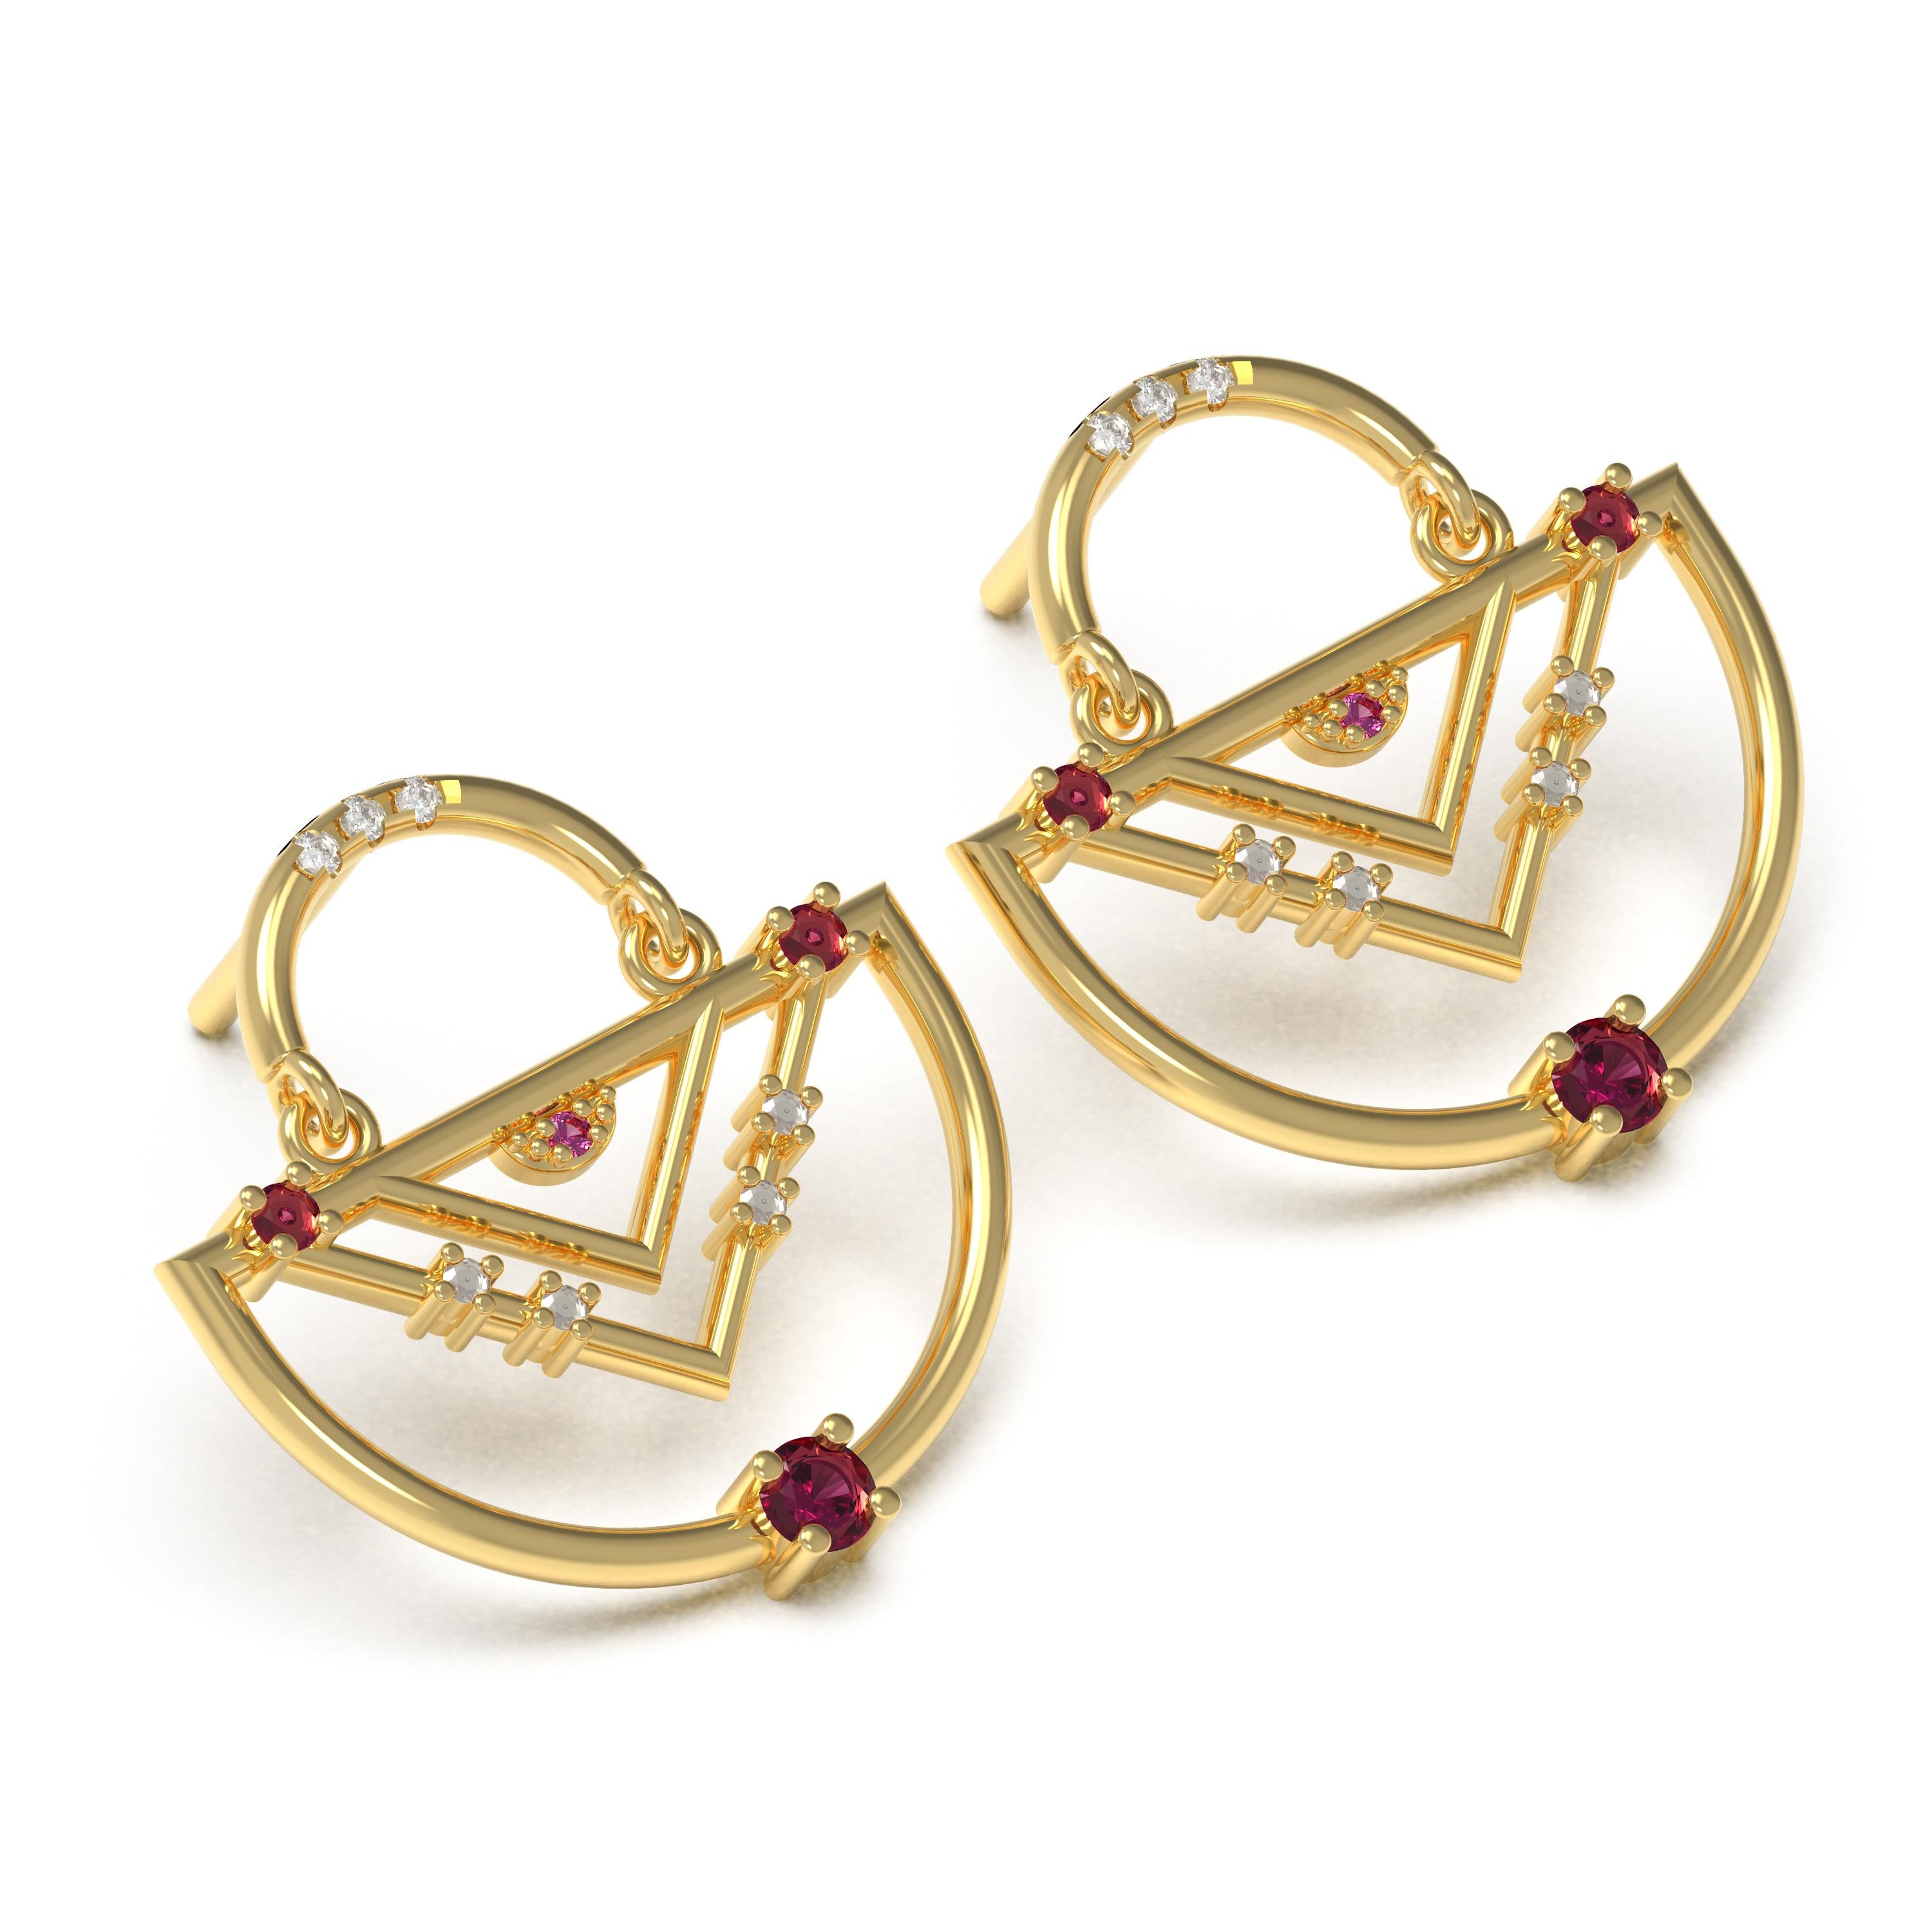 Designer: Alexia Gryllaki
Dimensions: L19x19mm
Weight: approximately 5.1g (pair)
Barcode: ING0011E

The Interlocking Geometry earrings in 18 karat yellow gold with rubies approx. 0.32cts and round brilliant-cut diamonds approx. 0.07cts .

About the